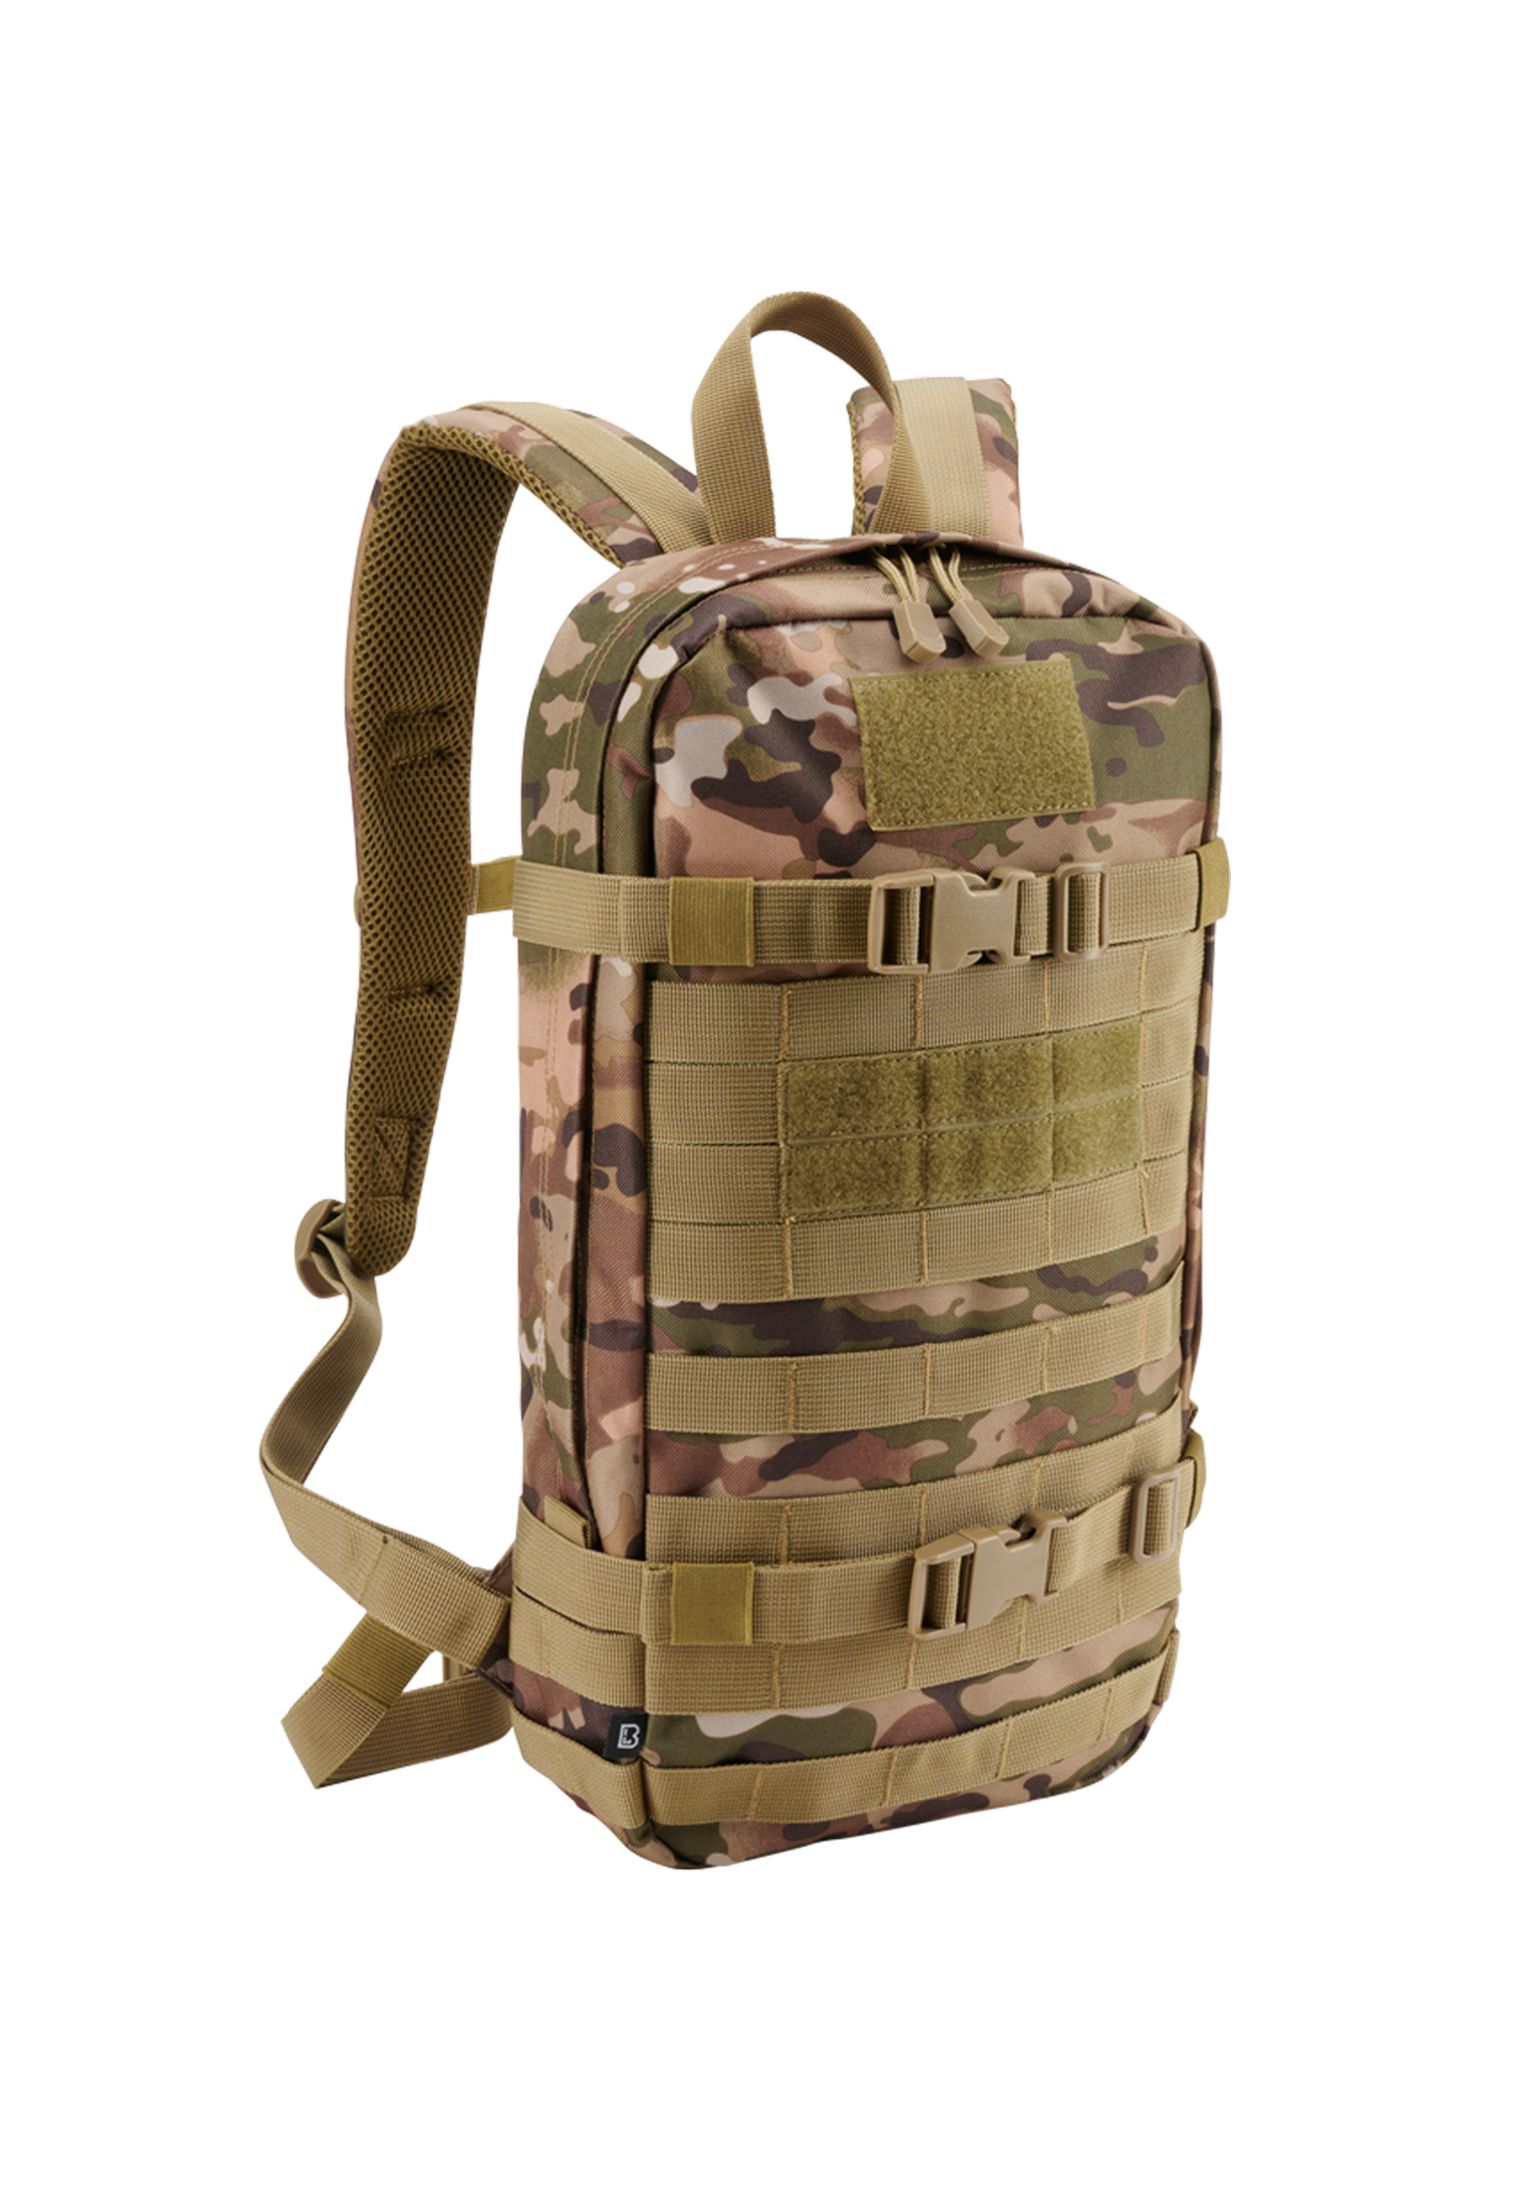 American Cooper Daypack tactical camouflage